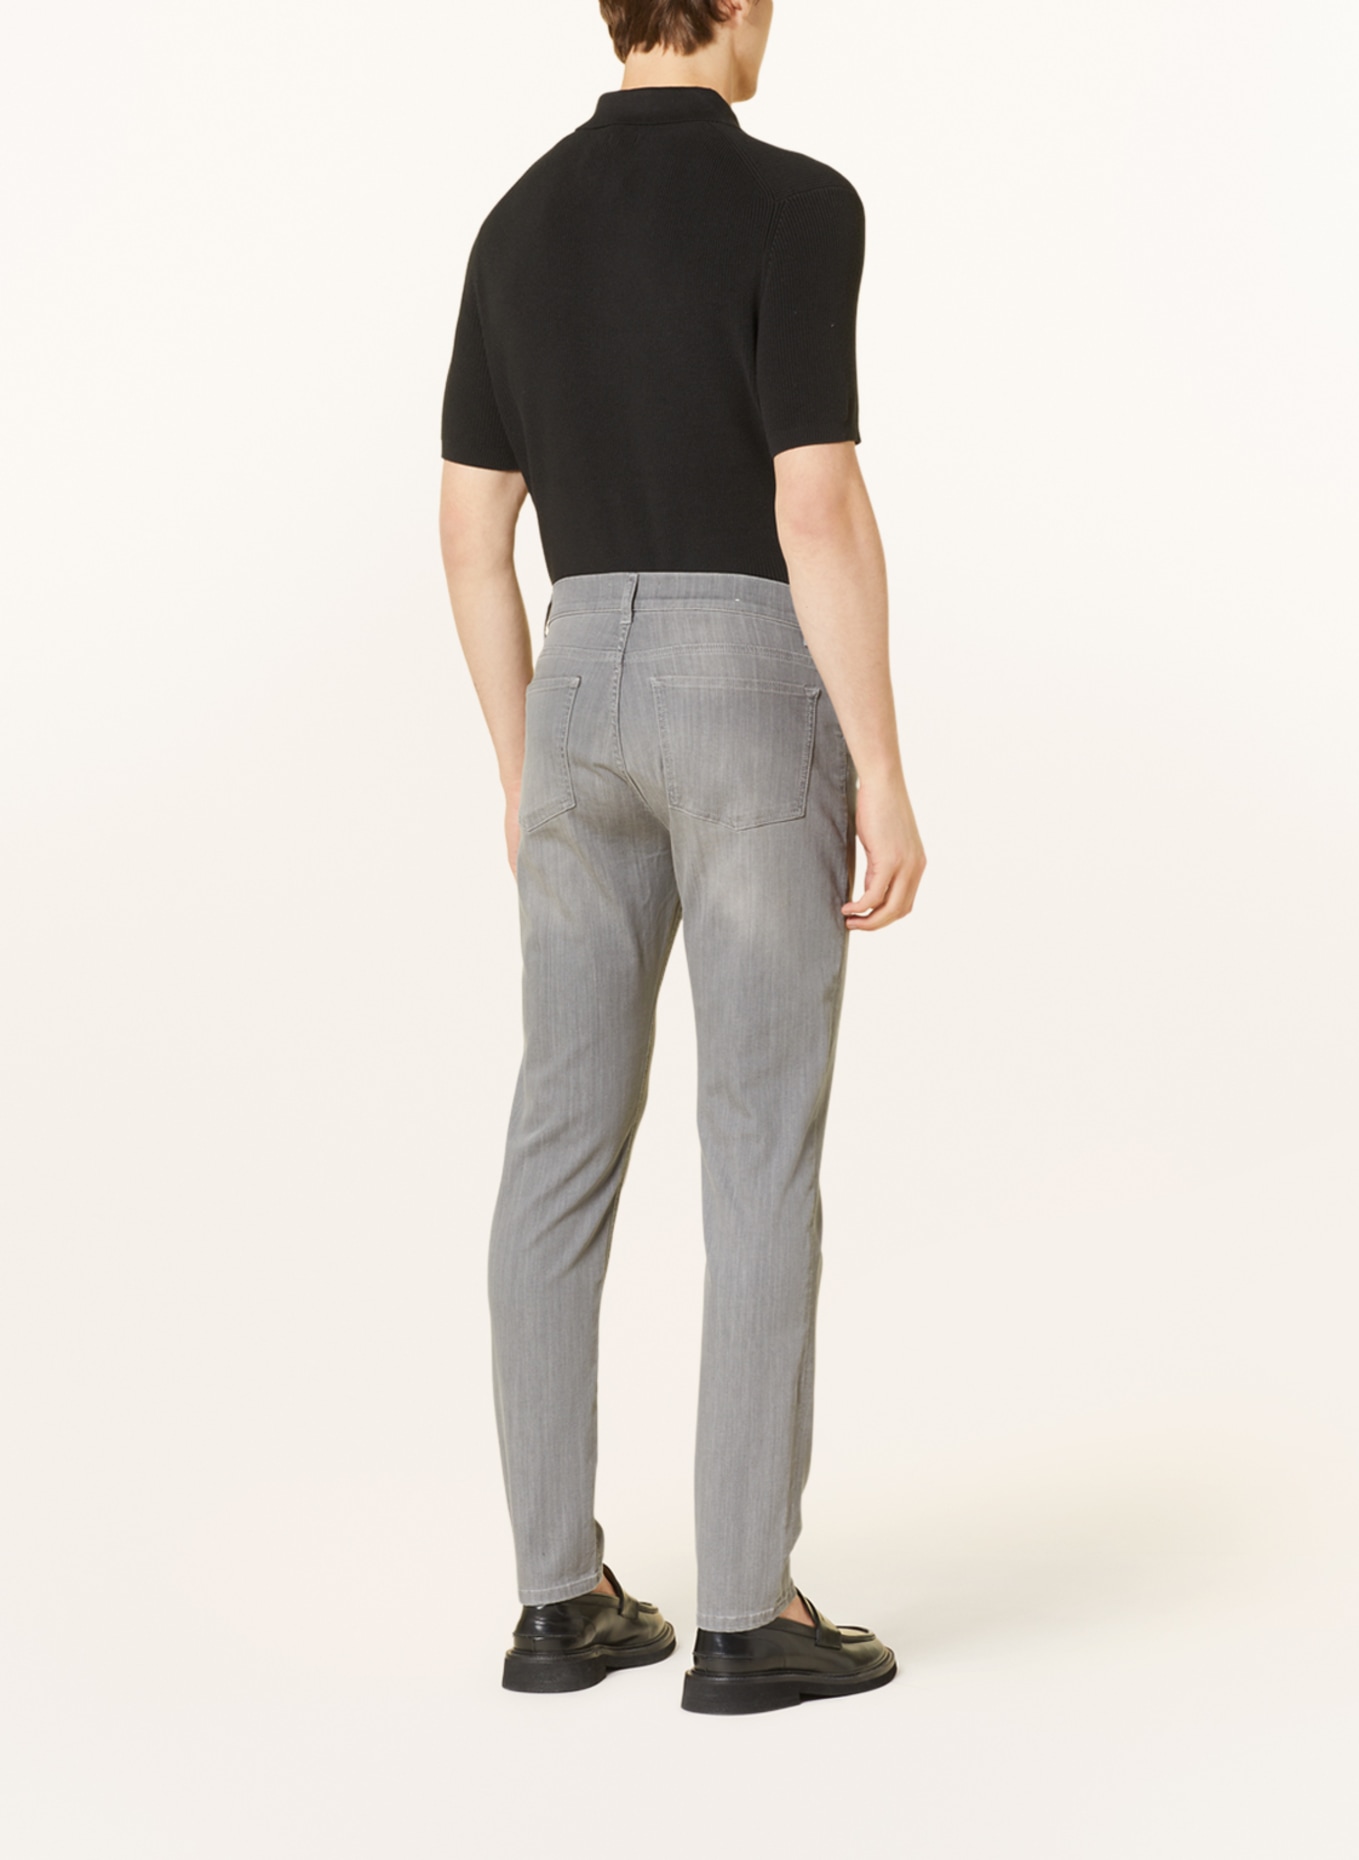 REISS Jeans HARRY Slim Fit, Farbe: 43 WASHED GREY (Bild 3)